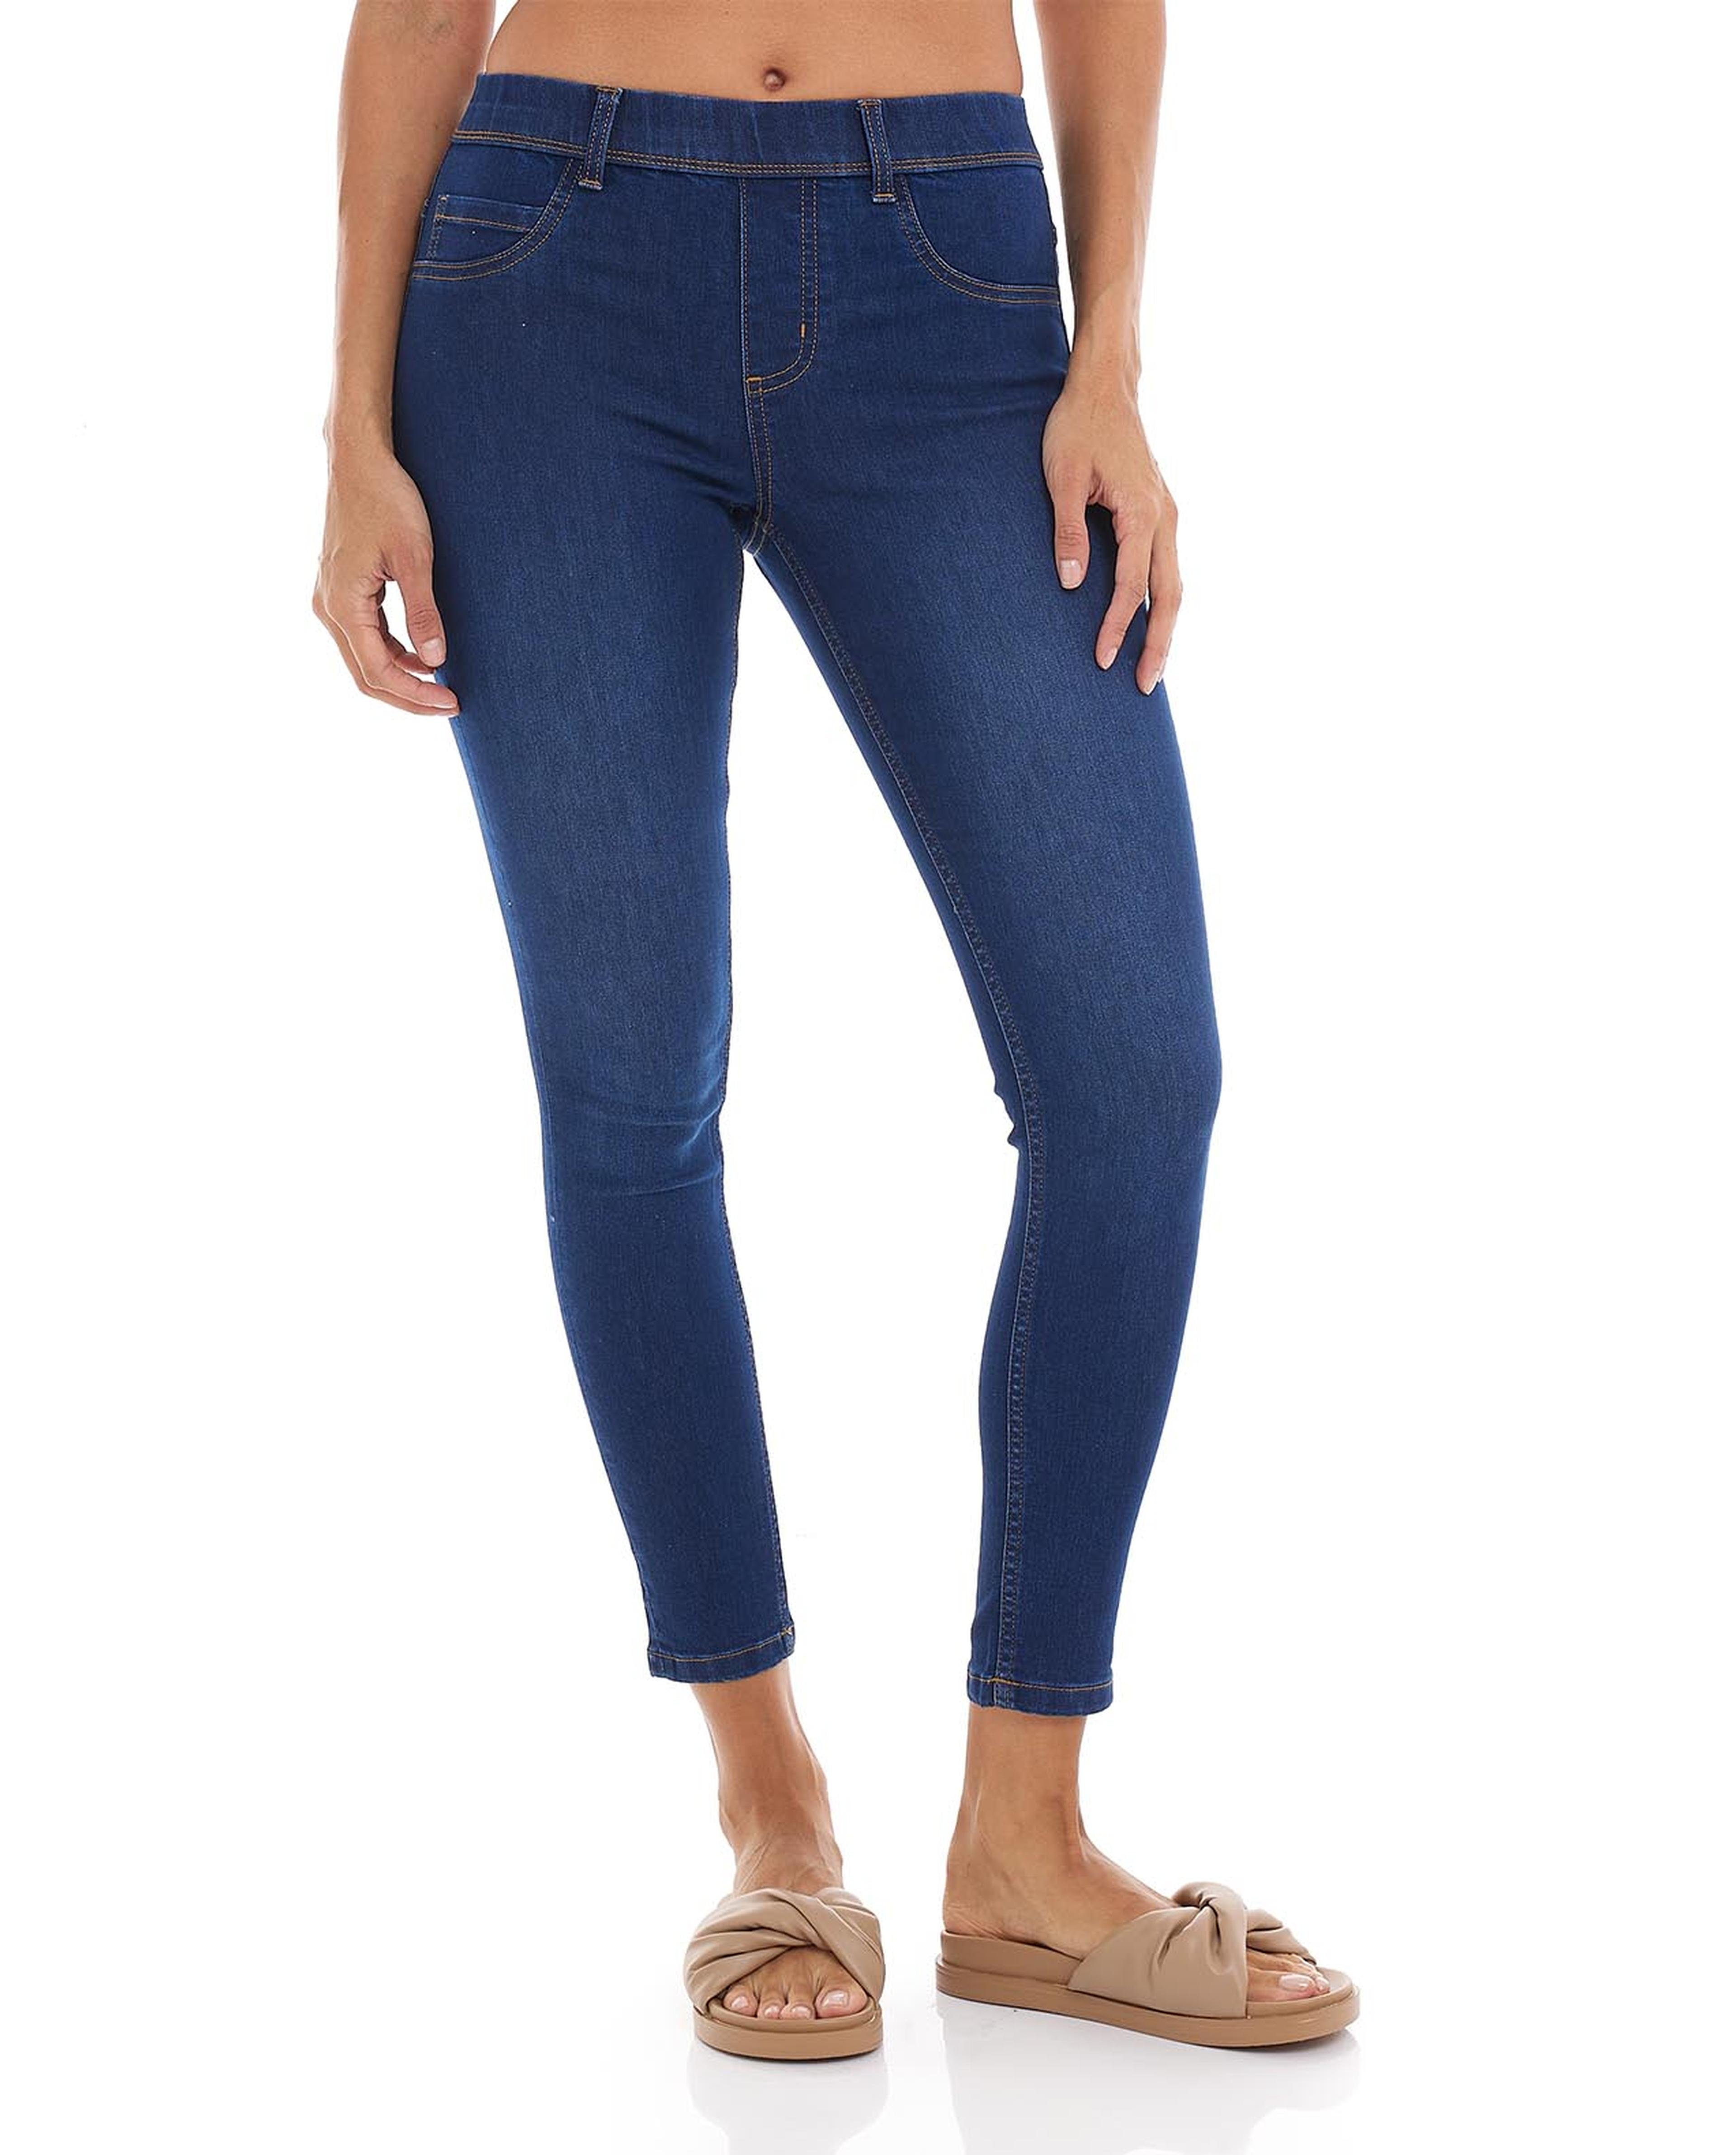 Shop Solid Jeggings with Elasticated Waist Online